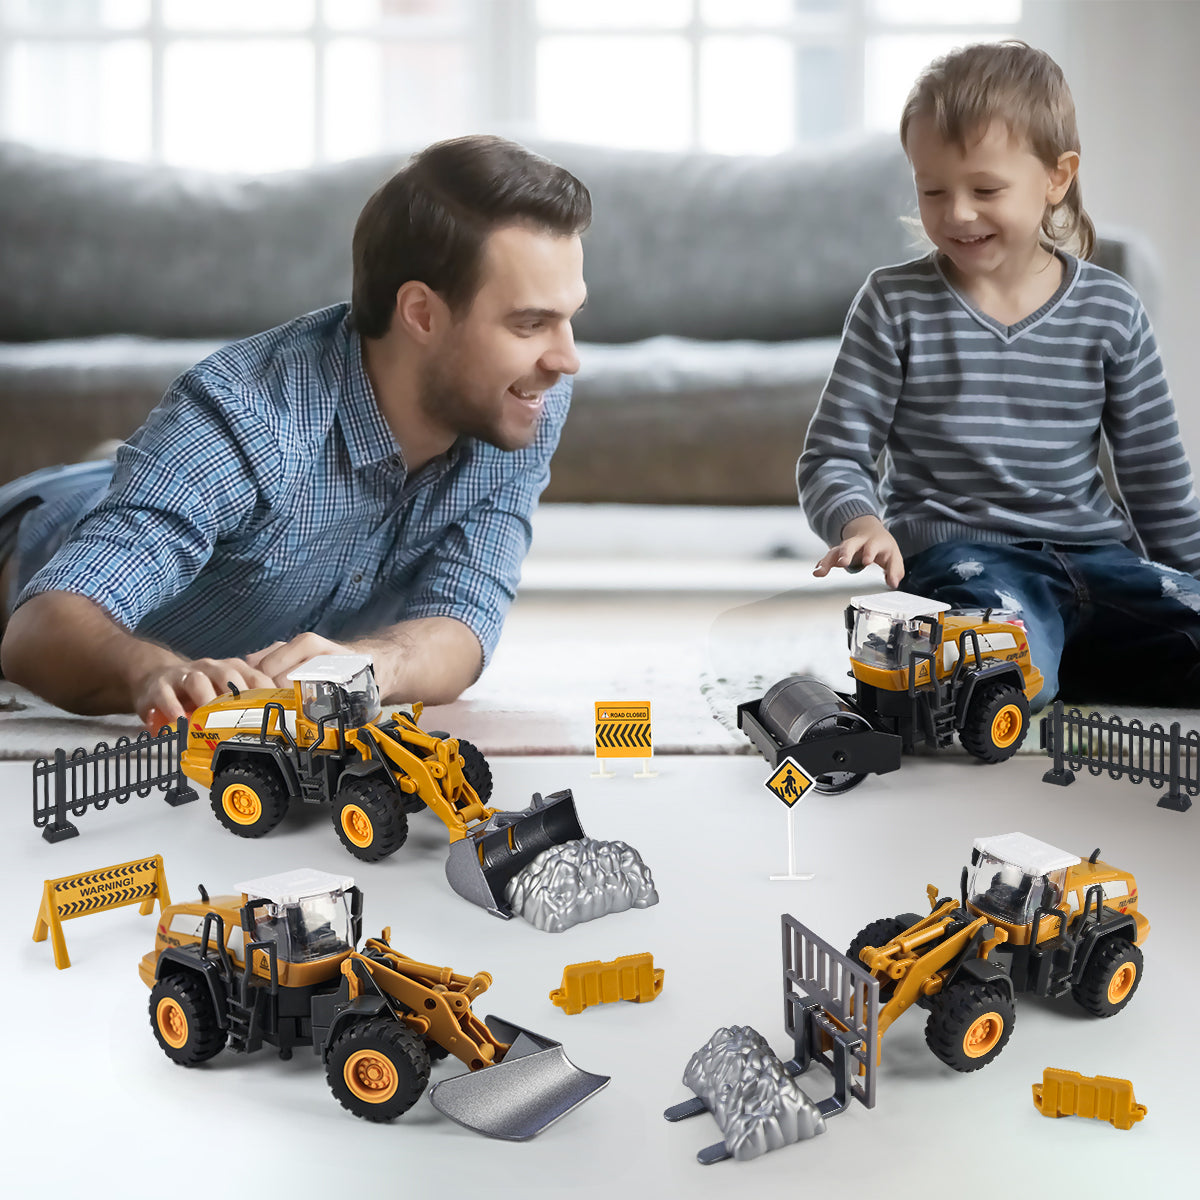 Joyfia 1: 55 Scale Construction Vehicles Trucks, Bulldozer, Forklift, Snowplow, Wheel Loader, 4 Alloy Interchangeable Parts, Kids Engineering Outdoor Sandbox Toys, Gift for Boys Toddlers 3-8 Years Old